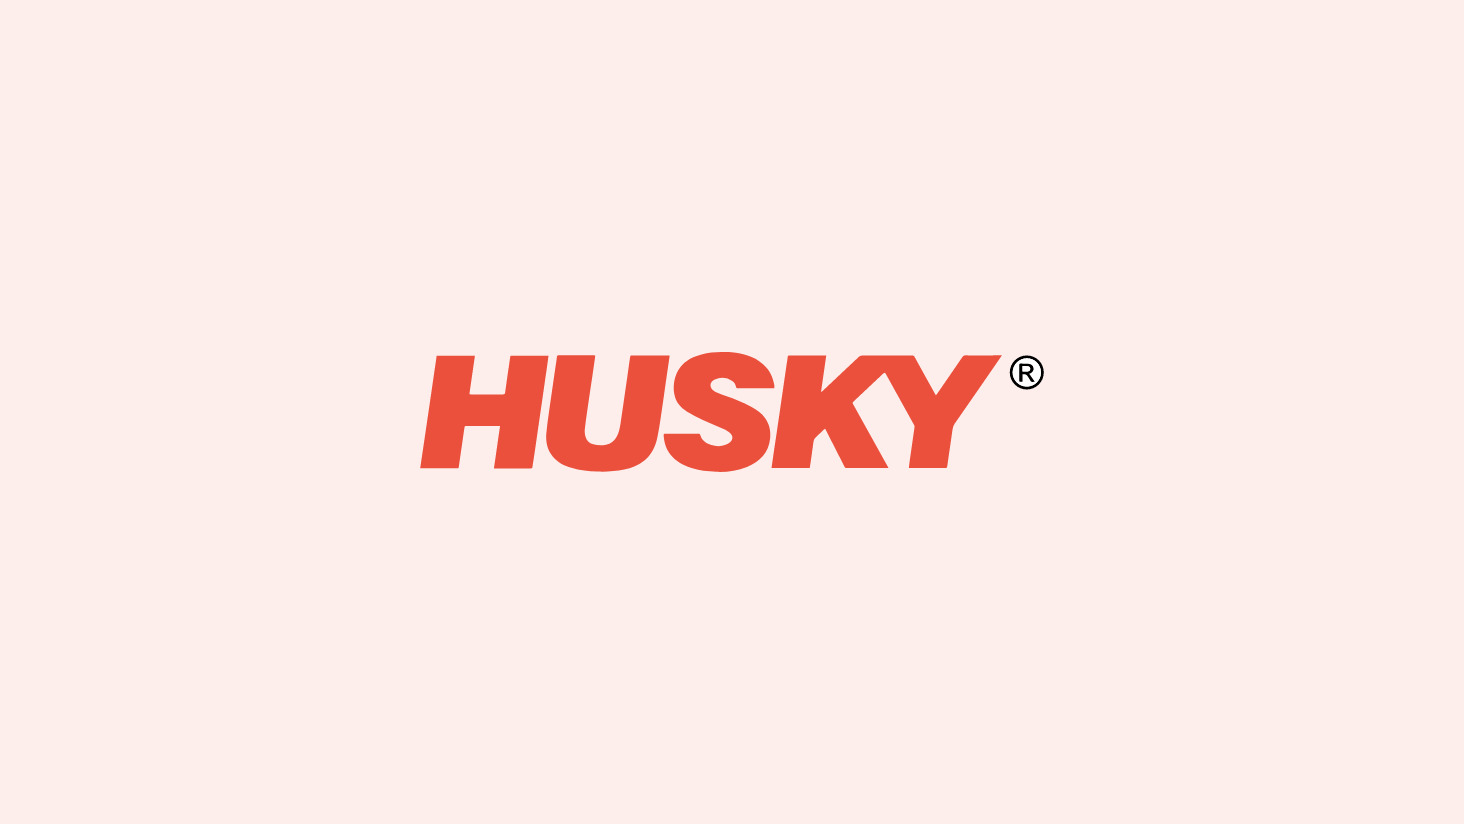 Husky Injection Molding Systems